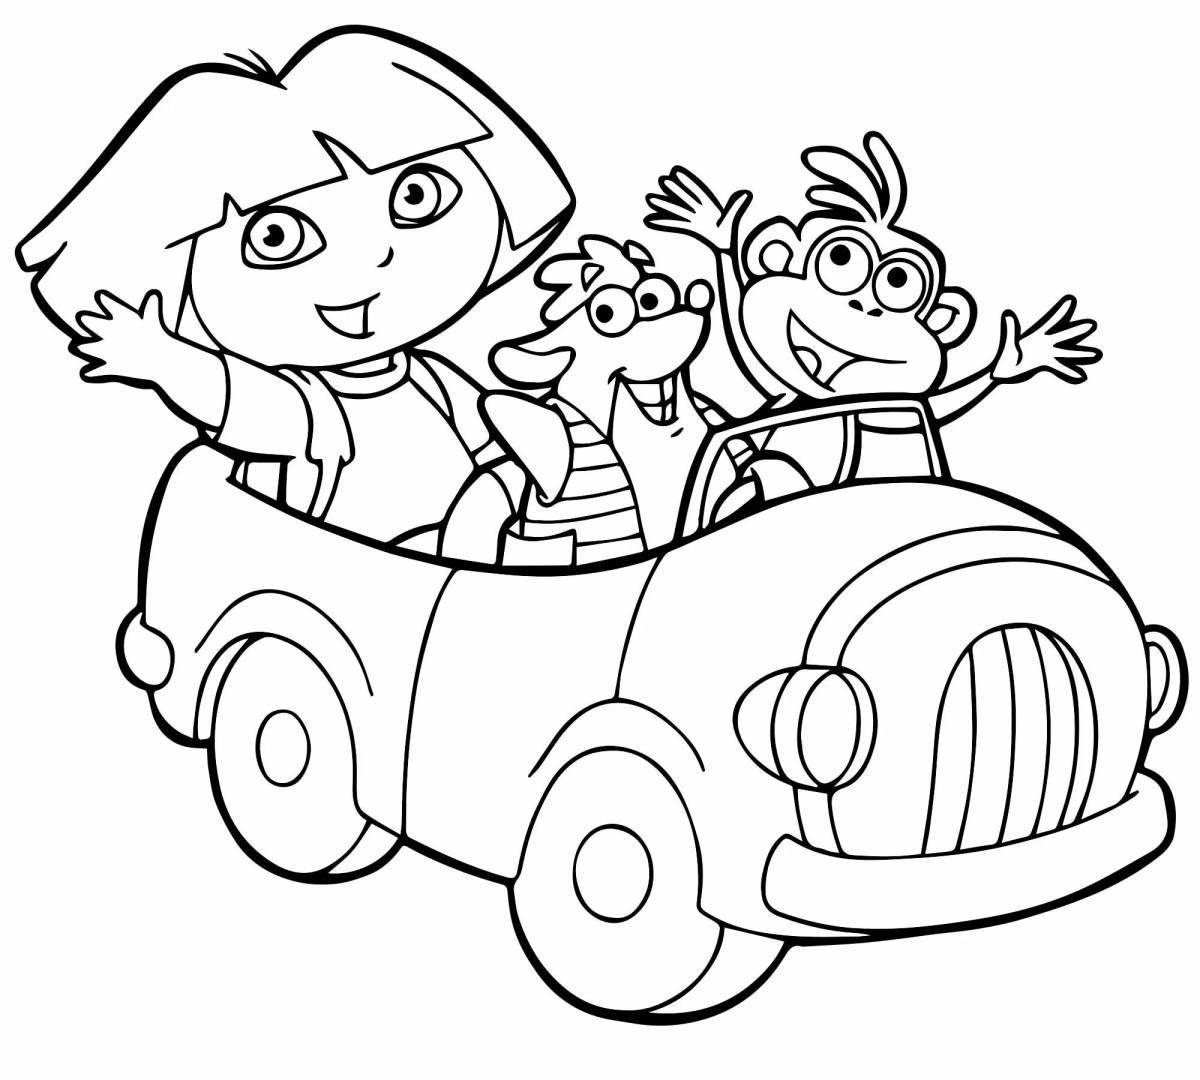 Fun cartoon coloring book for 4 year olds